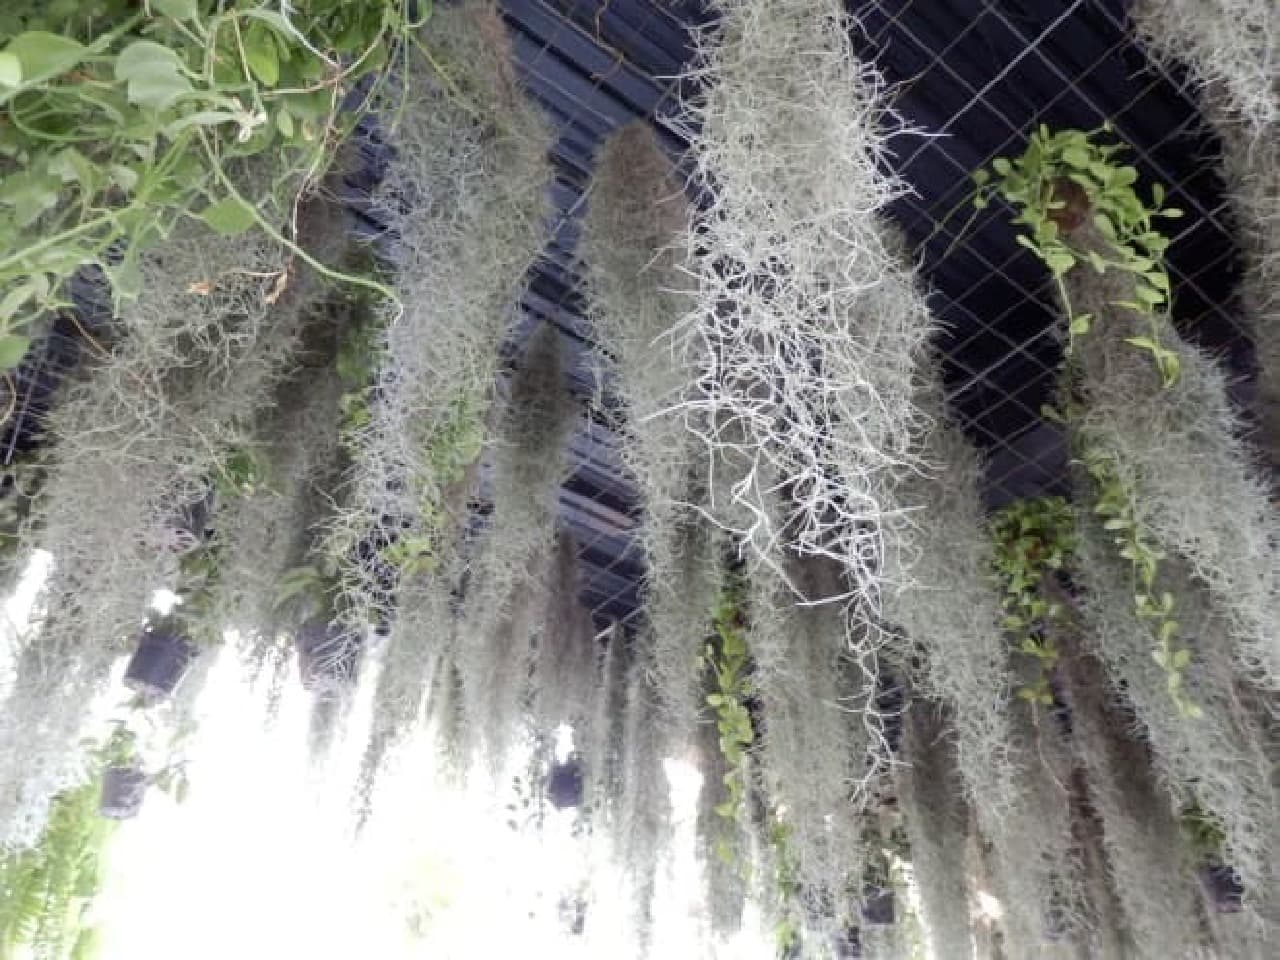 Go through the Airplants tunnel ...